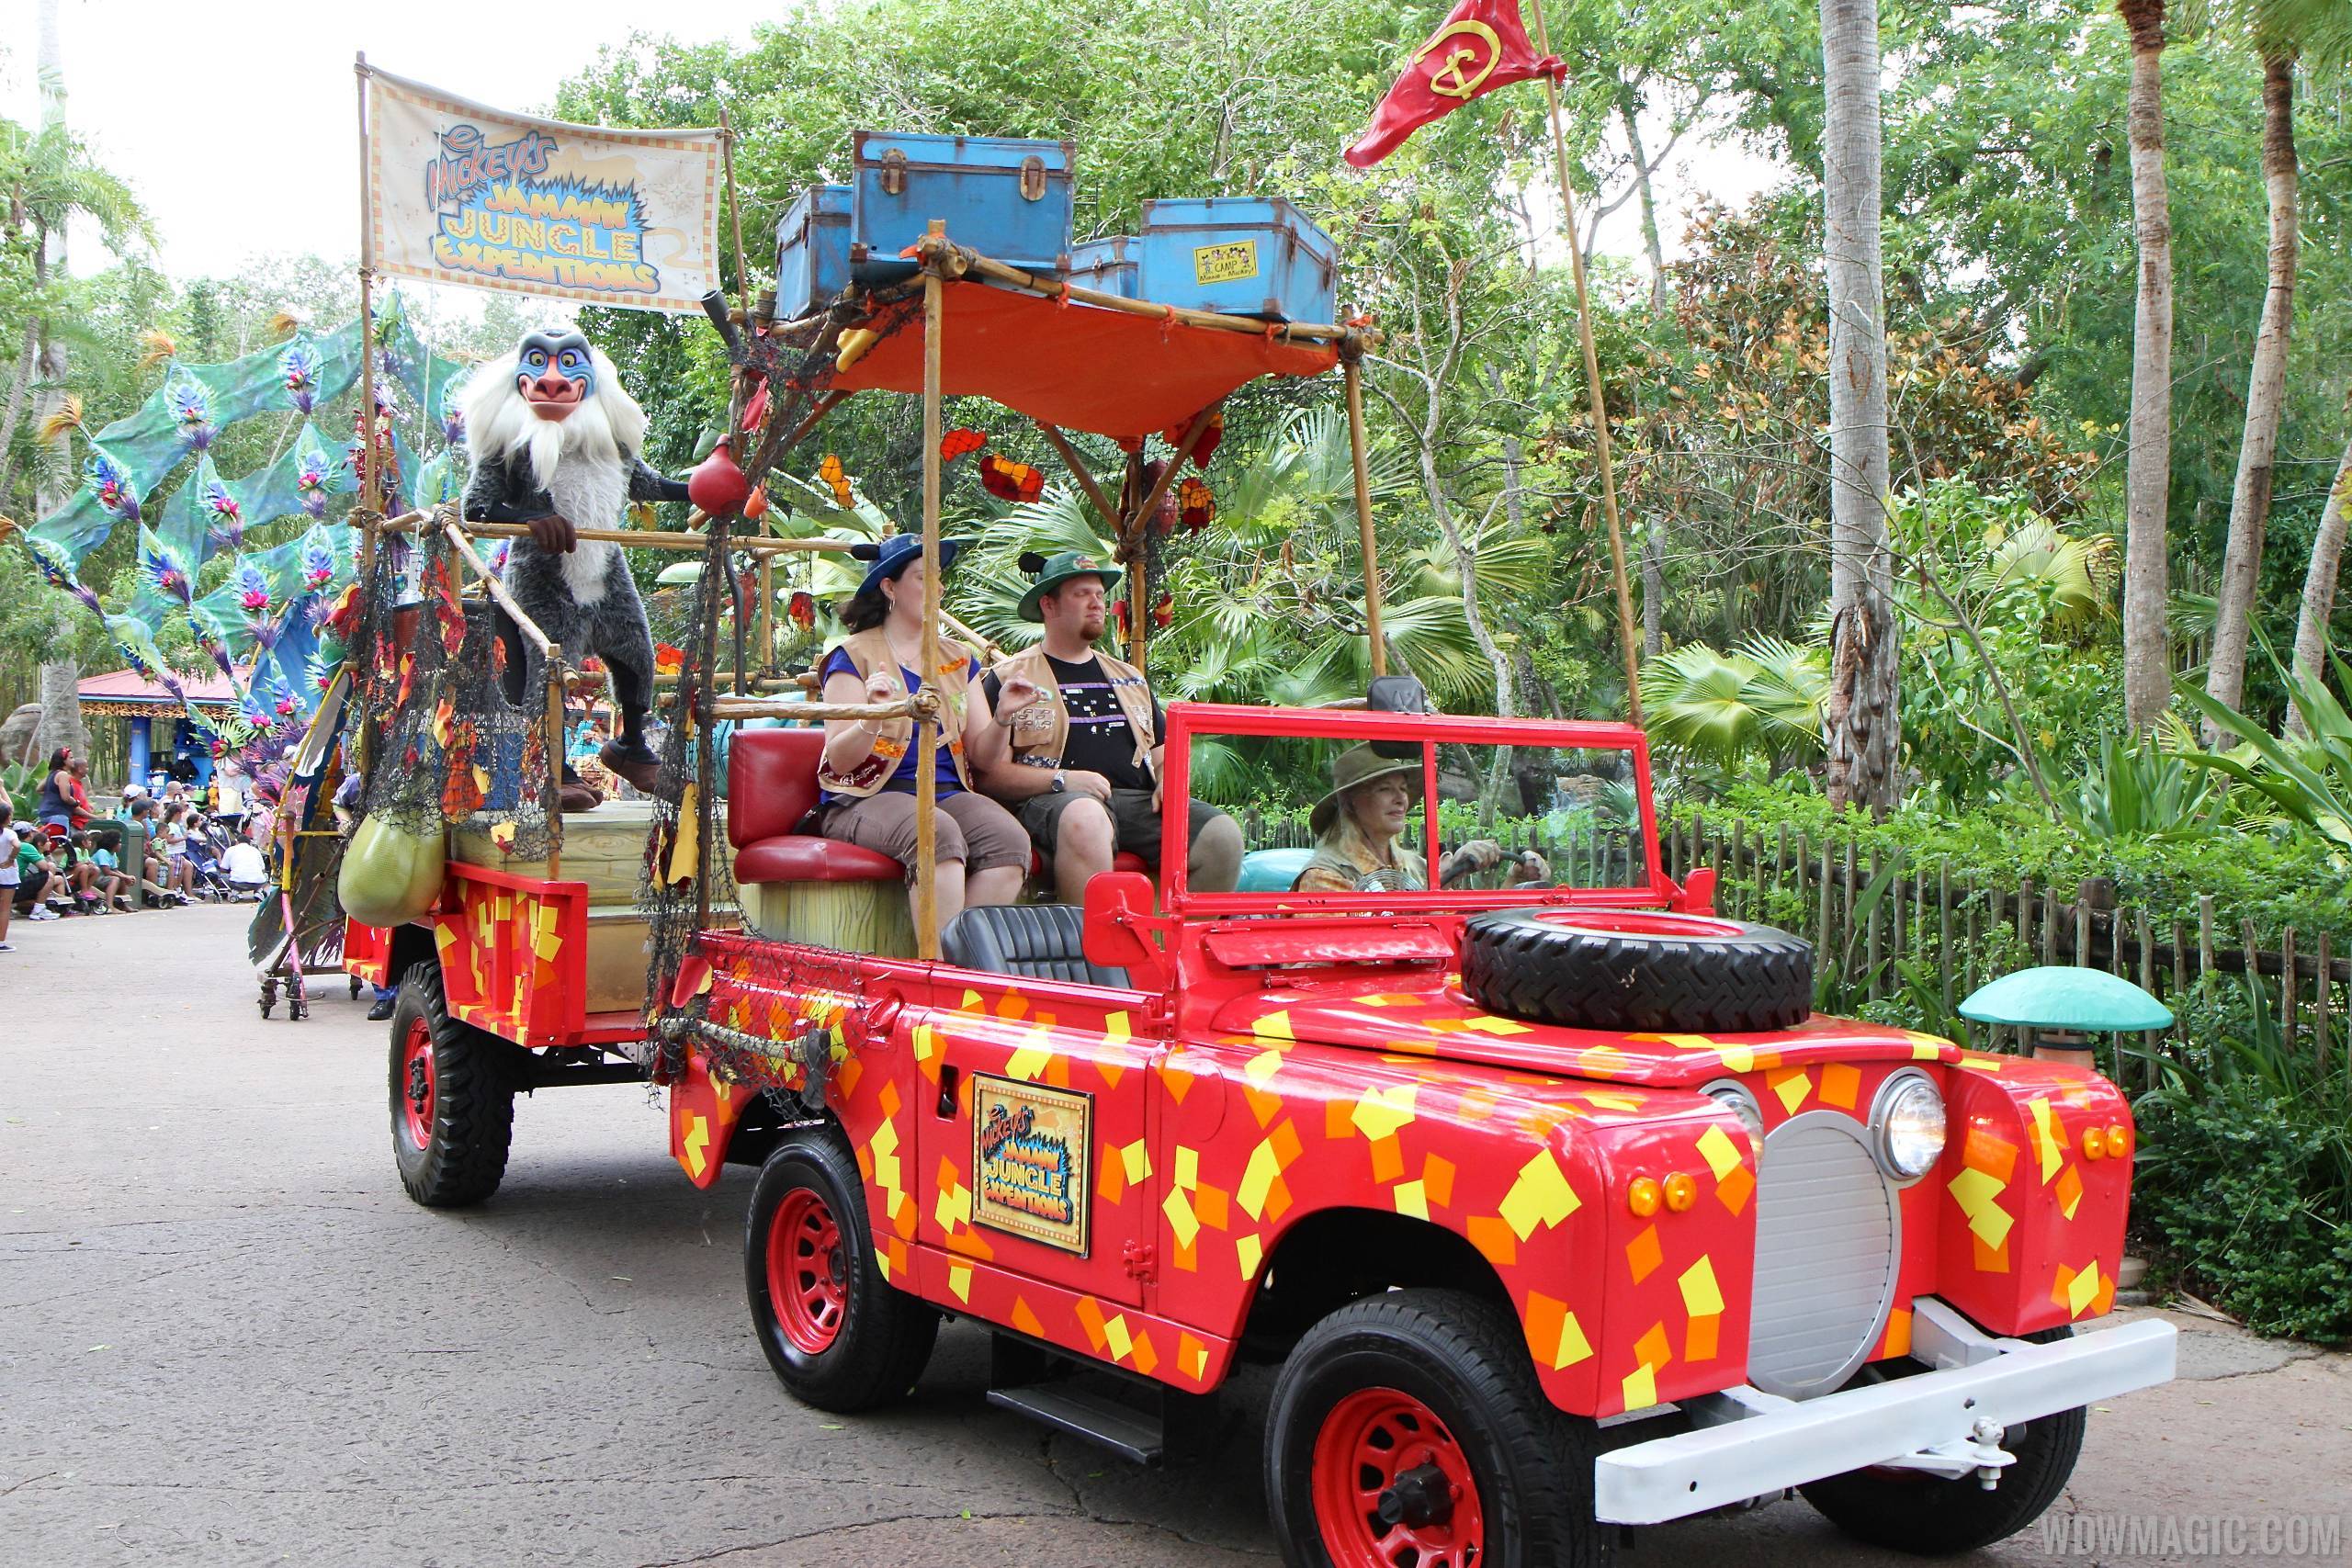 PHOTOS and VIDEO - Mickey's Jammin' Jungle Parade final performance